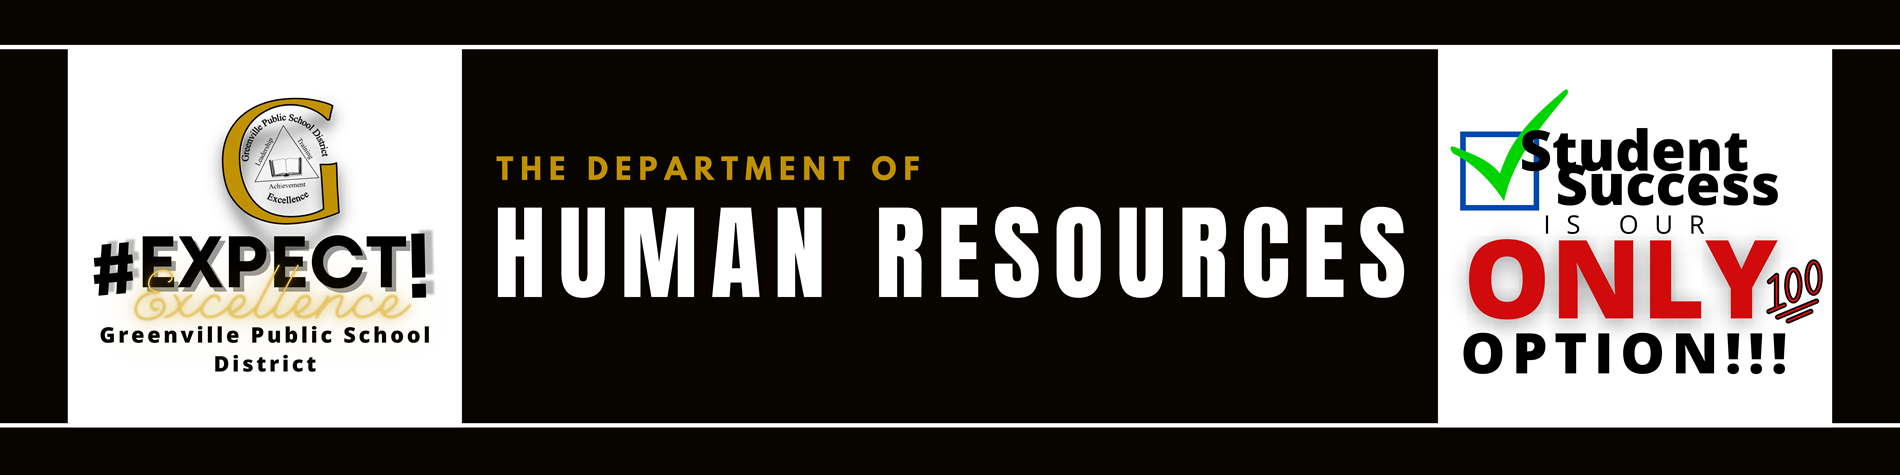 The Department of Human Resources